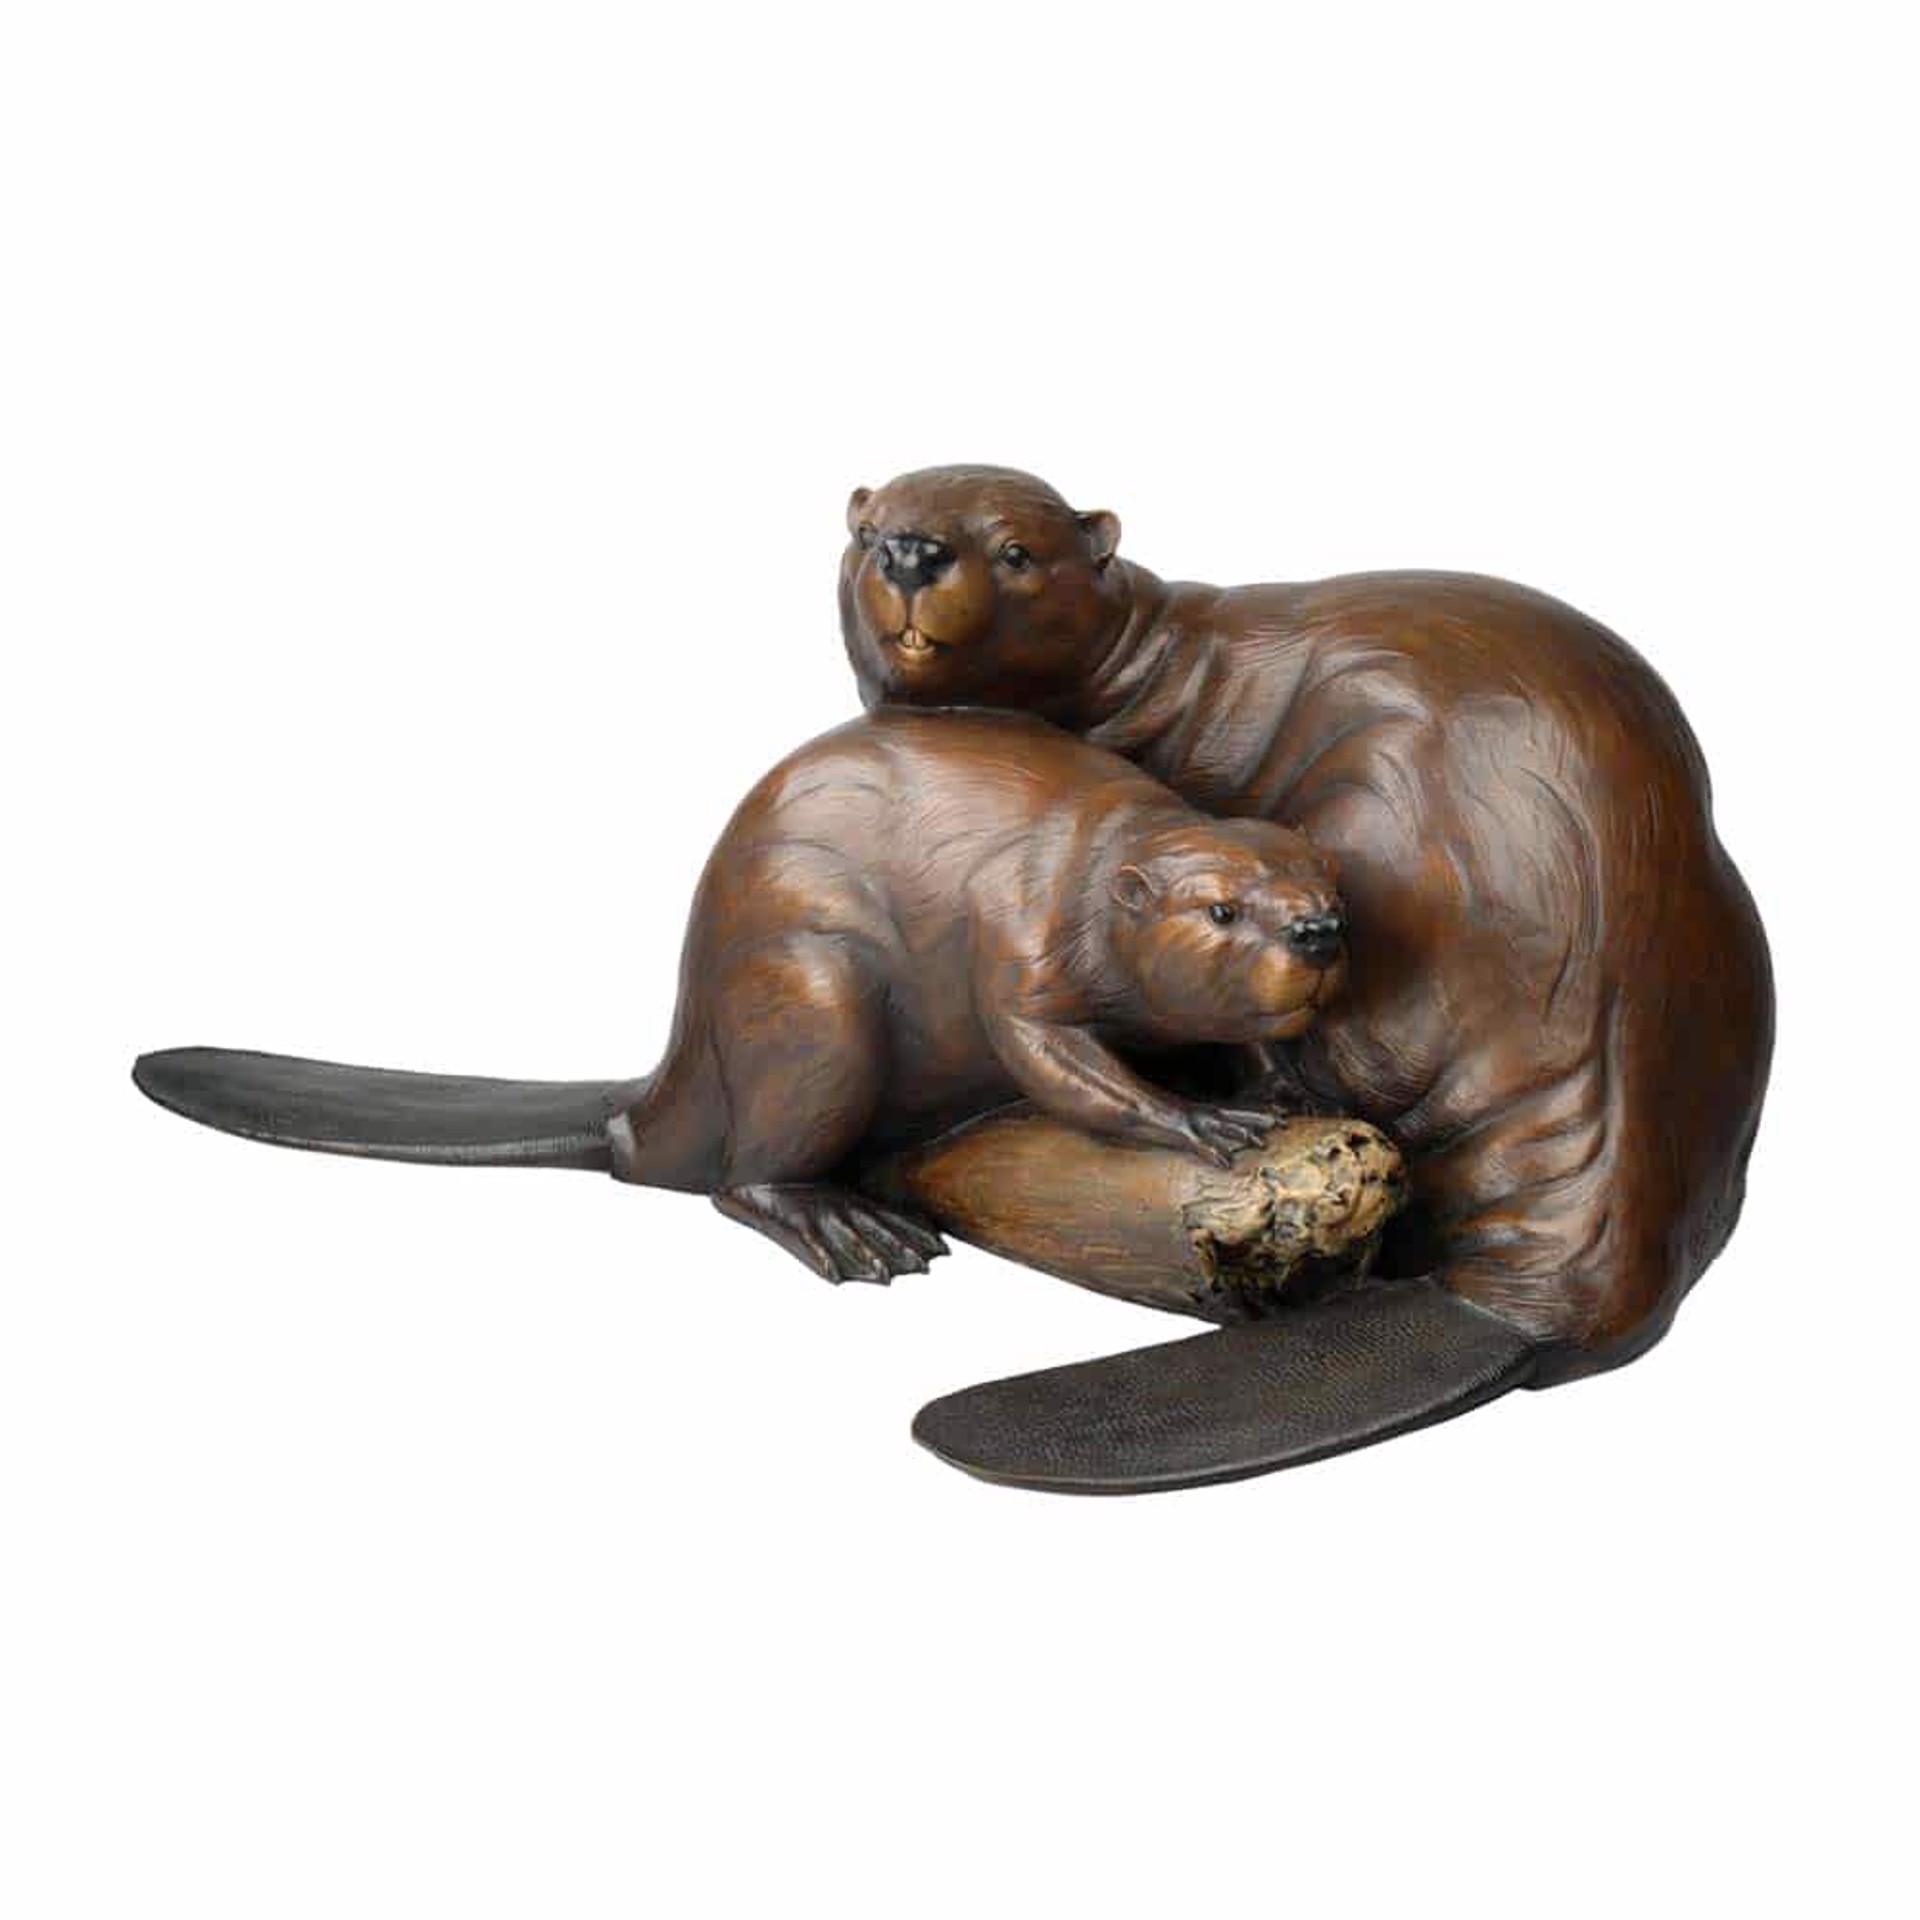 Beaver Pair Original Bronze Sculpture by Rip and Alison Caswell, Contemporary Fine Art, Modern Wildlife Art, Available At Gallery Wild